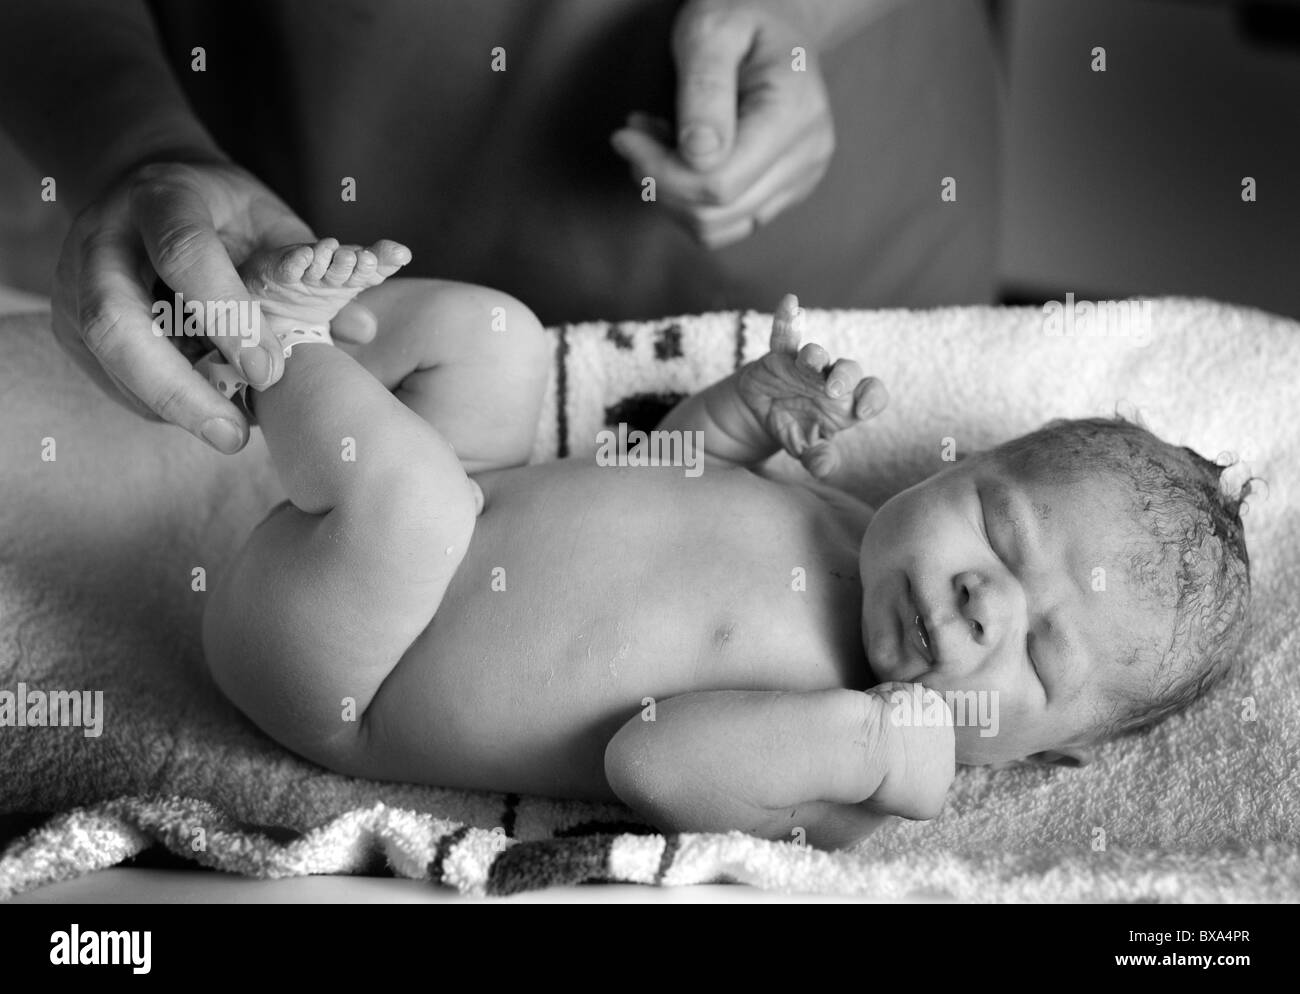 New born baby one minute old checked by midwife Stock Photo